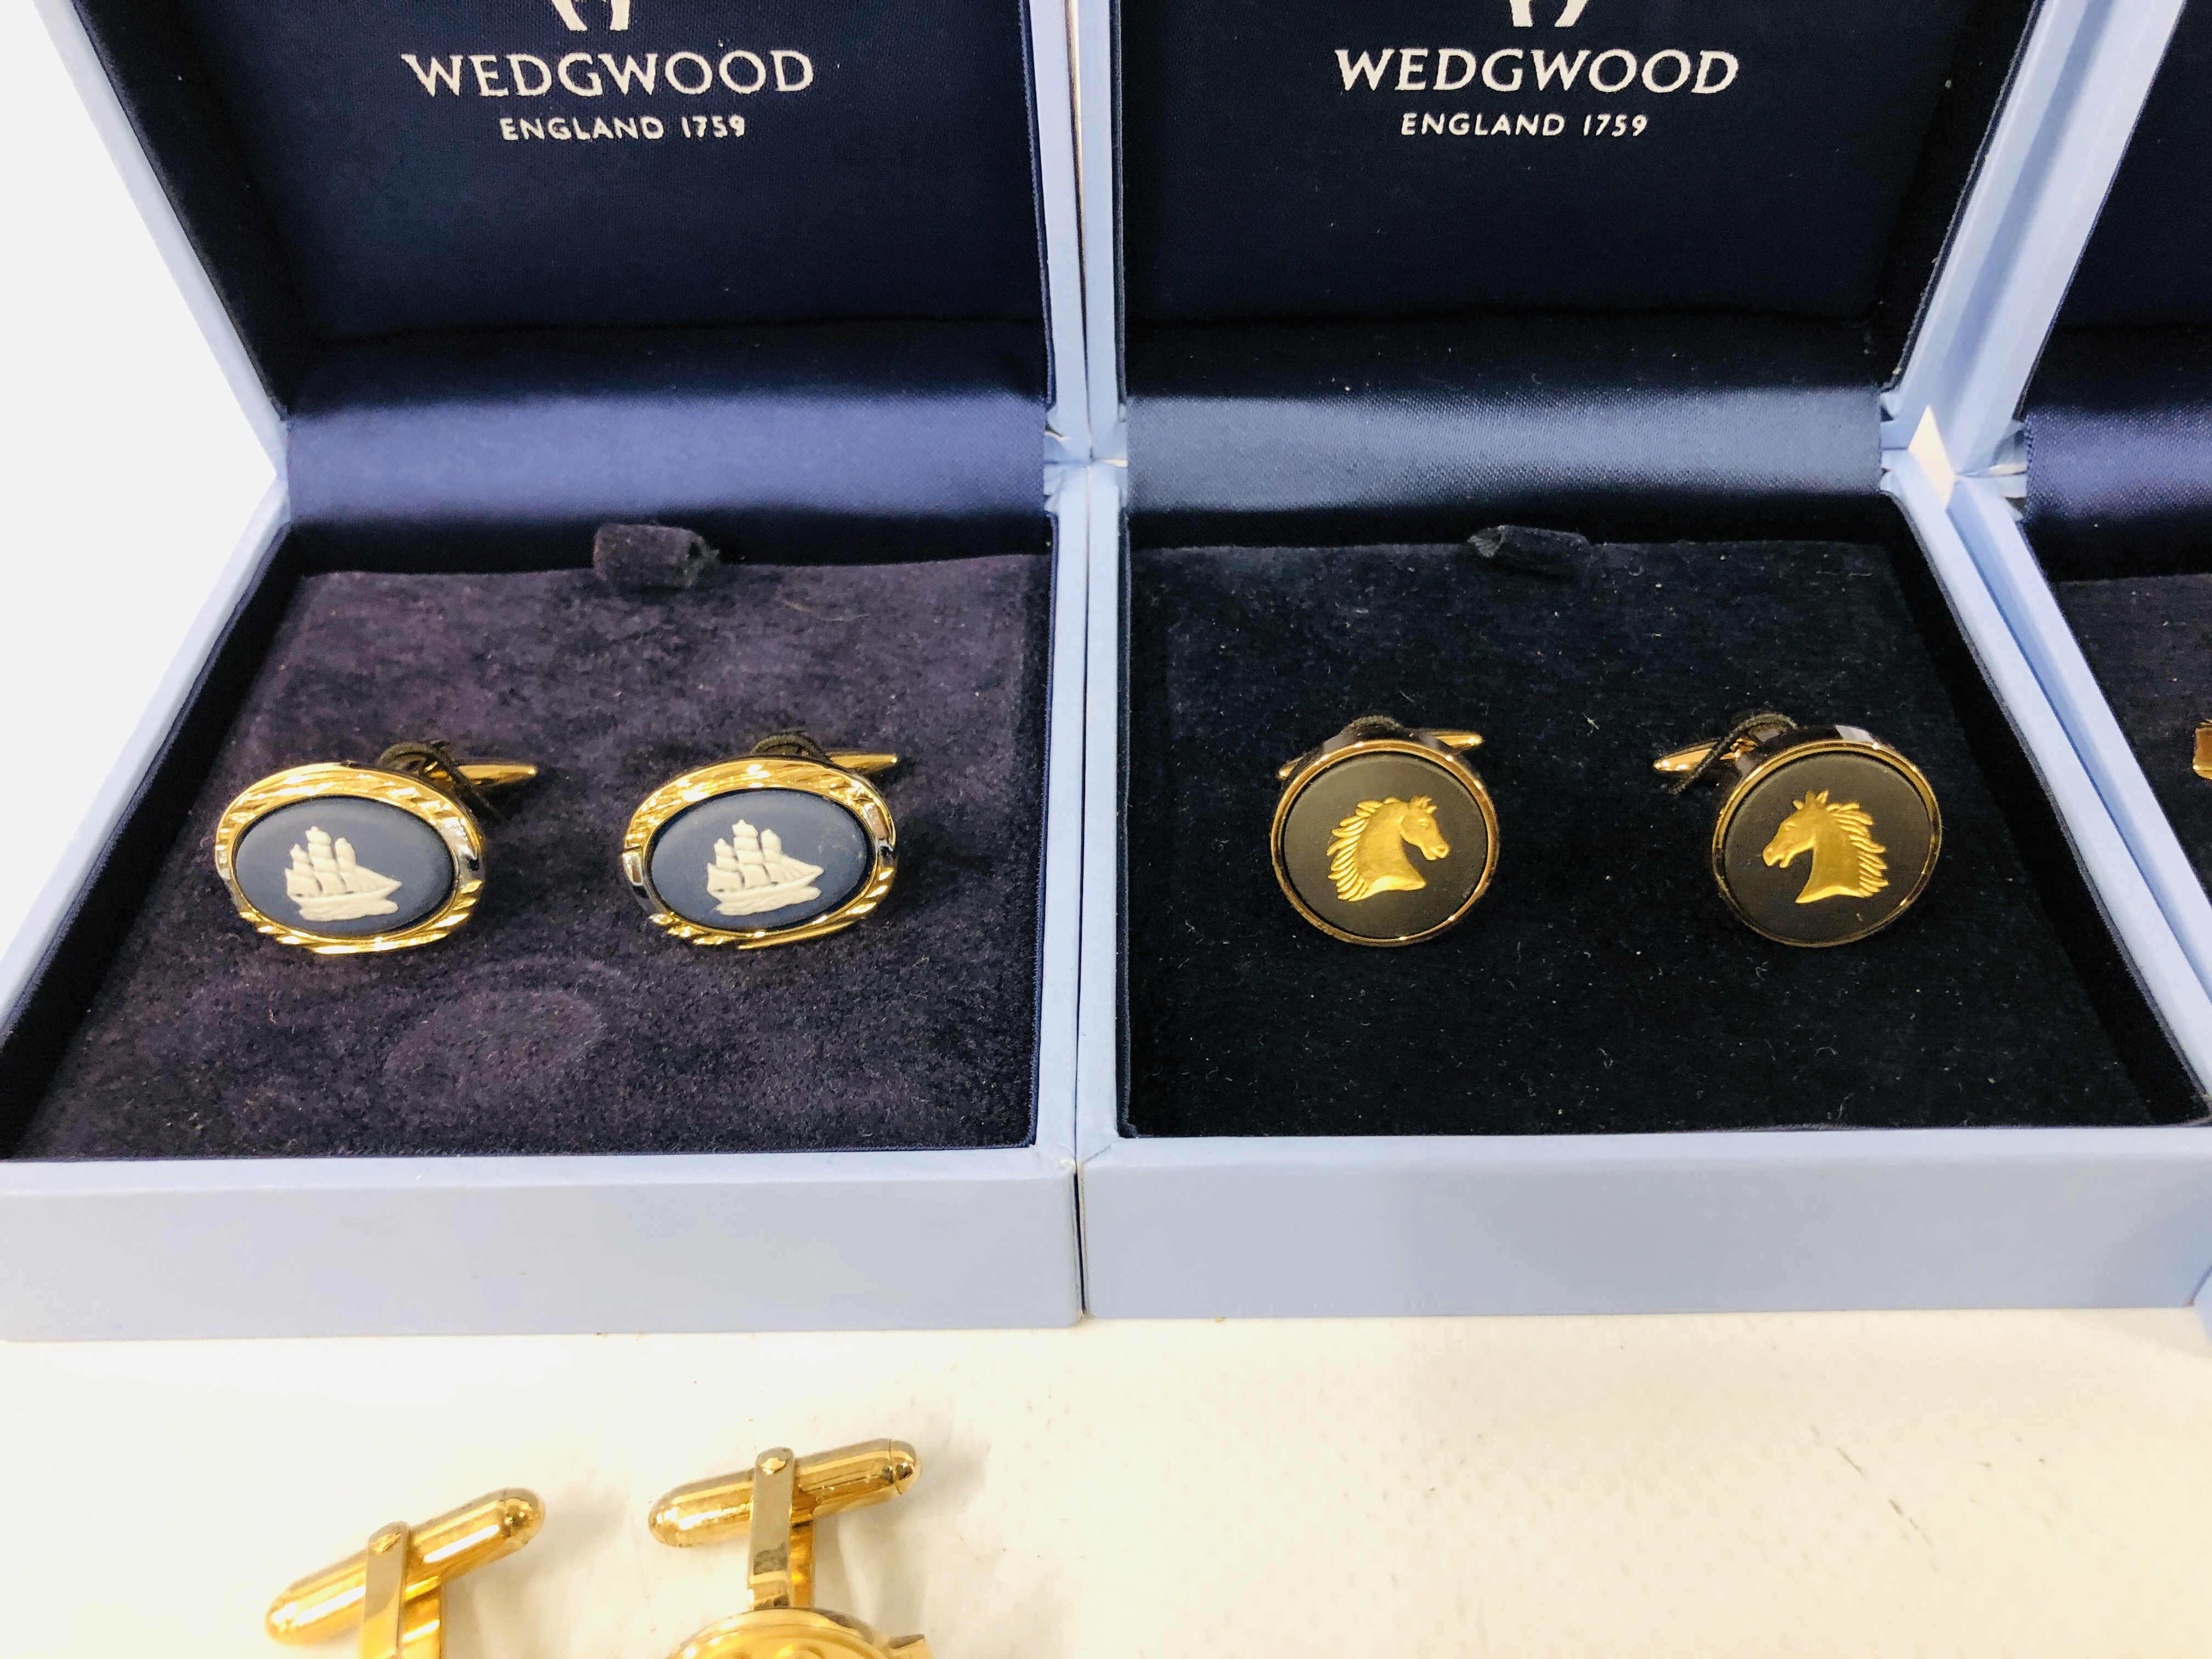 PAIR OF OVAL WEDGWOOD CUFF LINKS DEPICTING SHIPS ALONG WITH A MATCHING TIE CLIP AND A FURTHER PAIR - Image 3 of 4